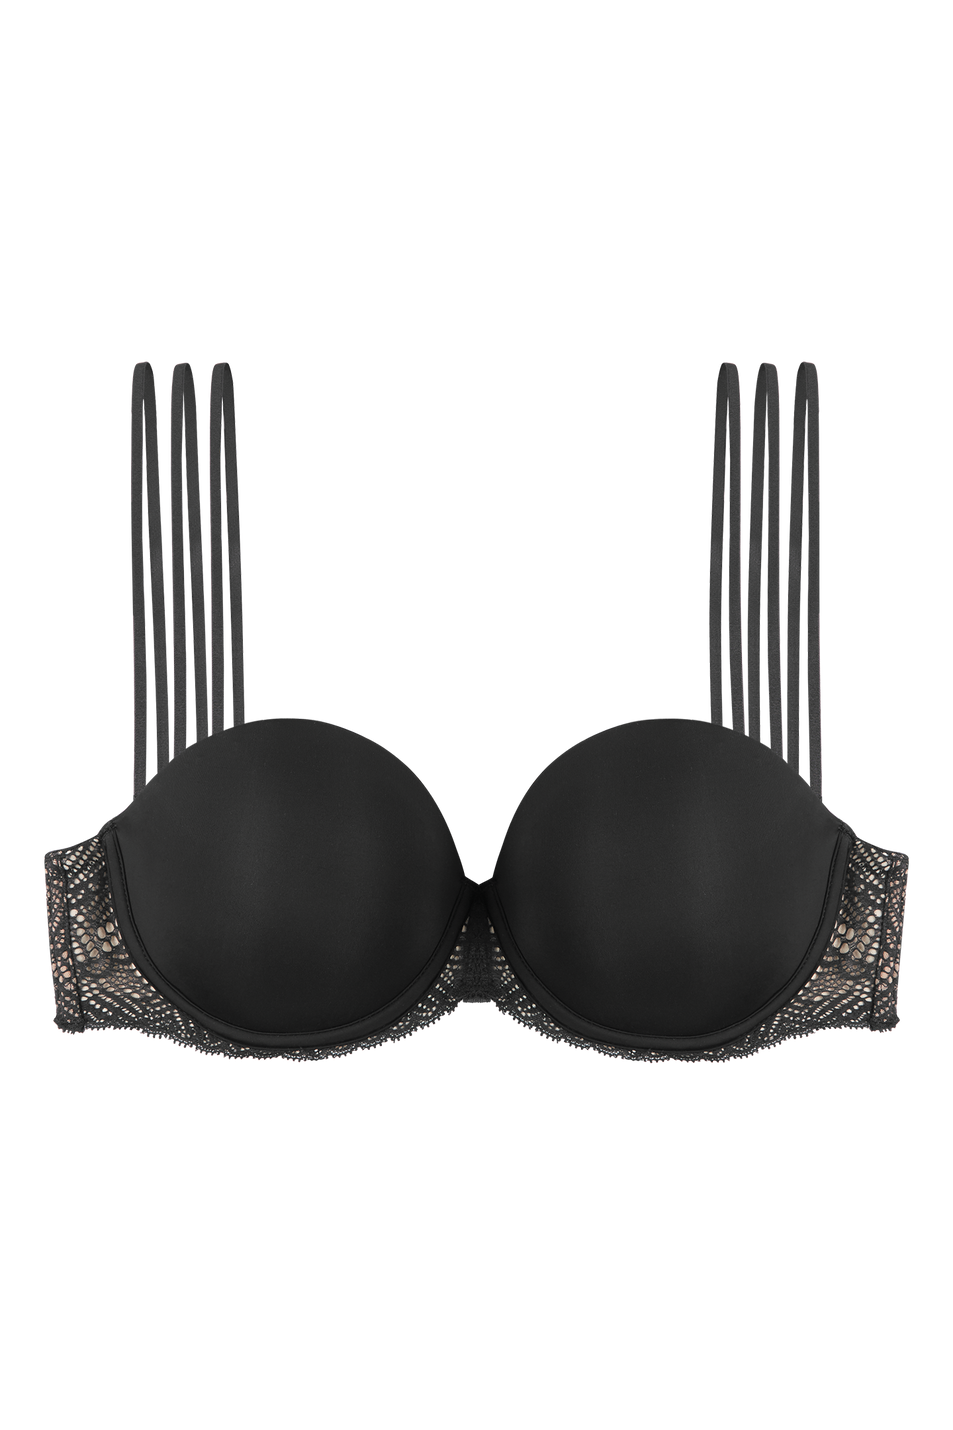 Midnightdivas - Ultimate Strapless Bra Black <3 LKR 2,800/- Say good  riddance to heavy, irritating strapless bras, and hello to our lightweight,  Up for Anything Ultimate Strapless Bra! Thanks to our innovative